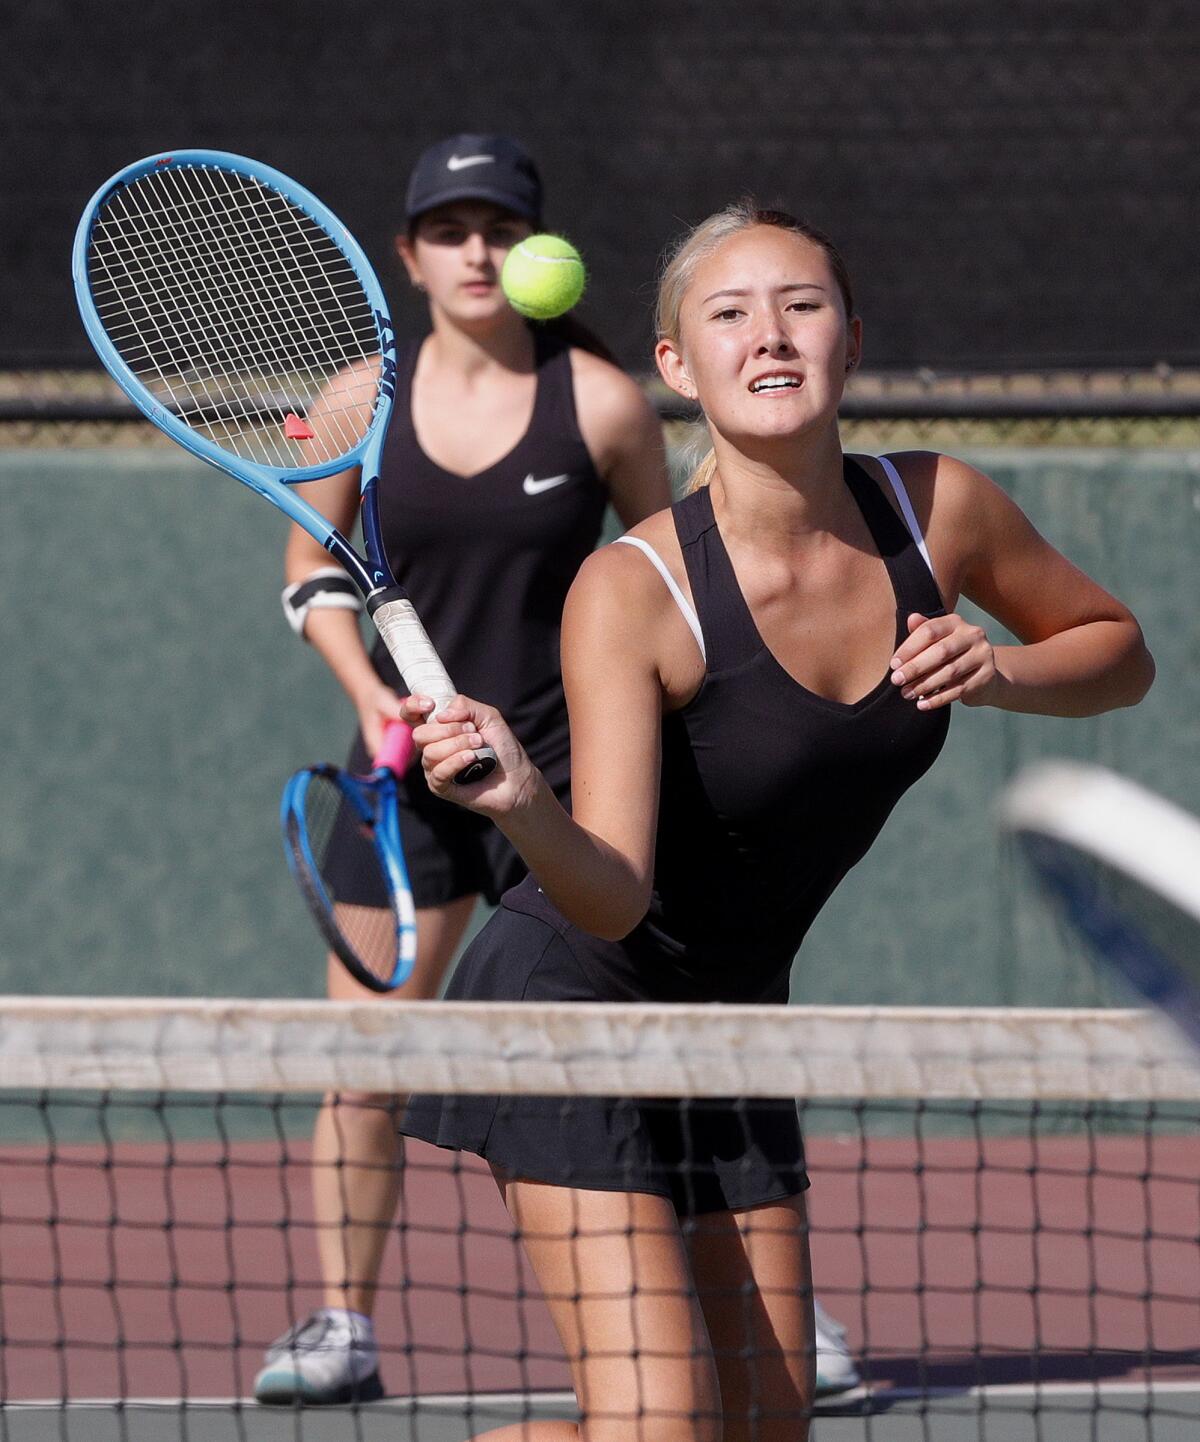 Glendale's Momo Guzman hits a return at the net in a semifinal doubles match against Arcadia with teammate Celine Khachiki in the Pacific League girls' tennis semifinals and finals at Burroughs High School on Wednesday, October 30, 2019. A couple of the contests were second-round contests, played today because of poor air quality on Monday.